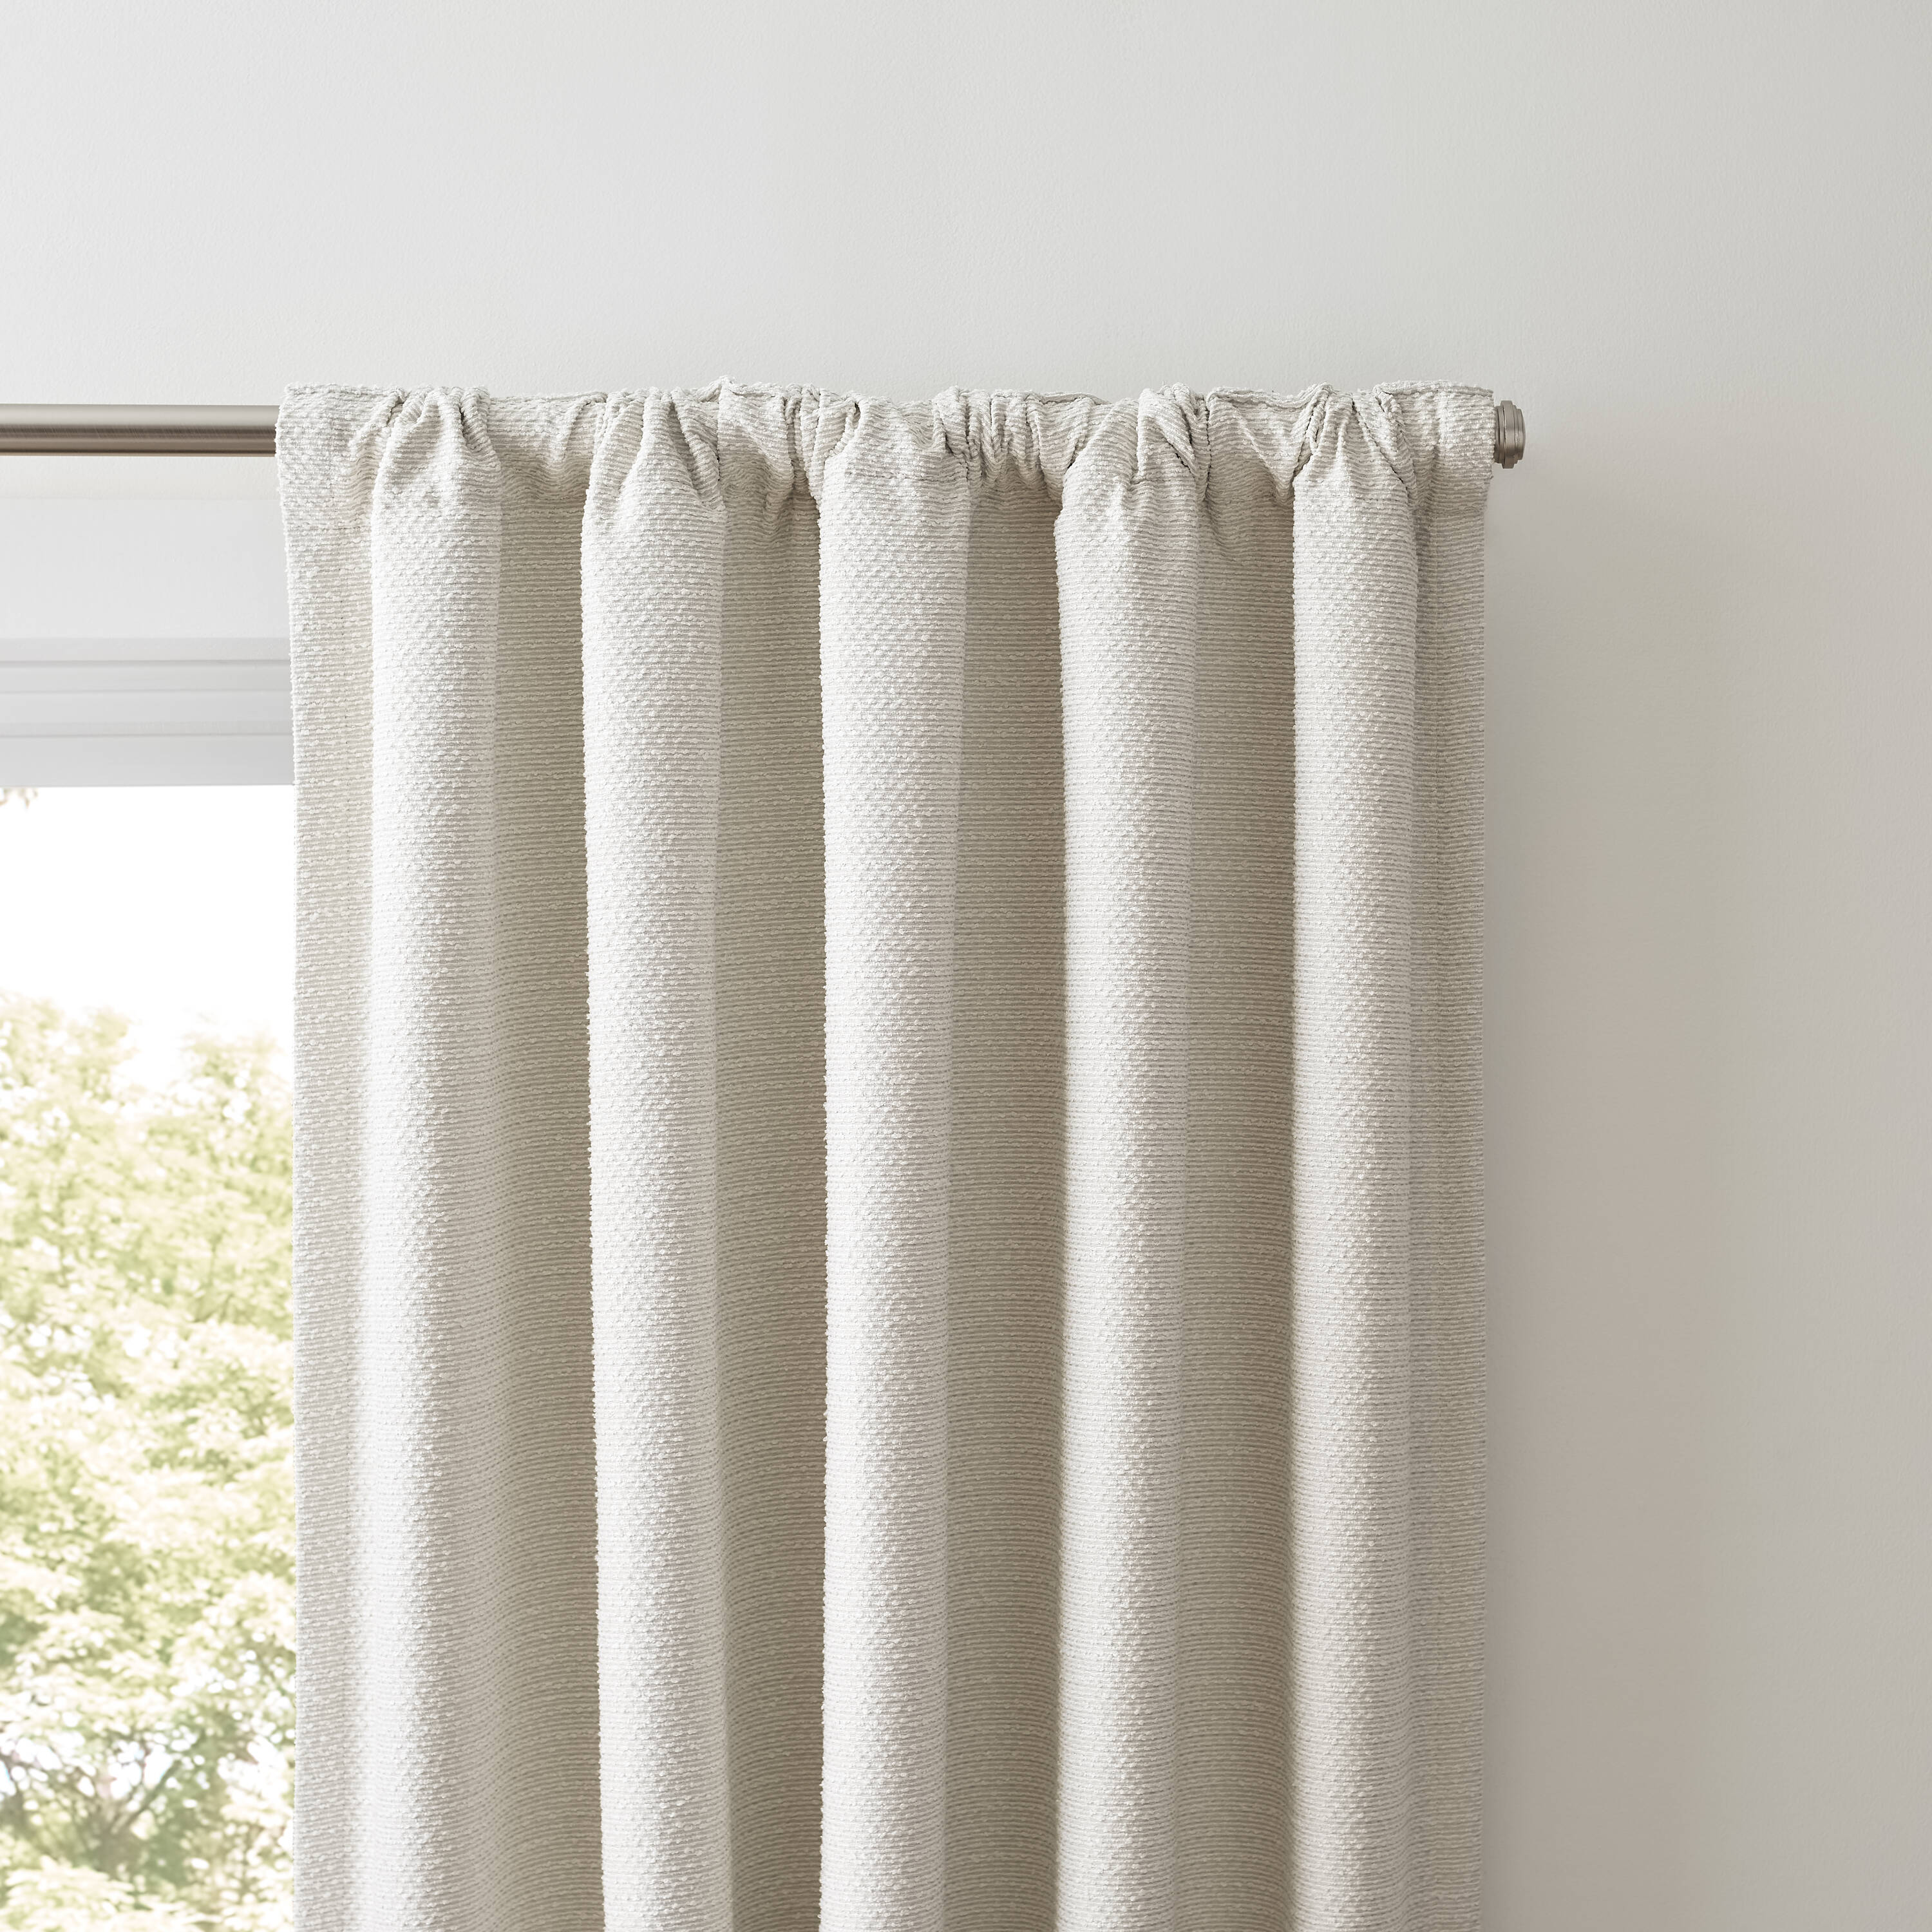 Origin 21 84-in Lined Drapes Thermal the Single Back in at Curtain department Panel & Tab Curtains Blackout Ivory